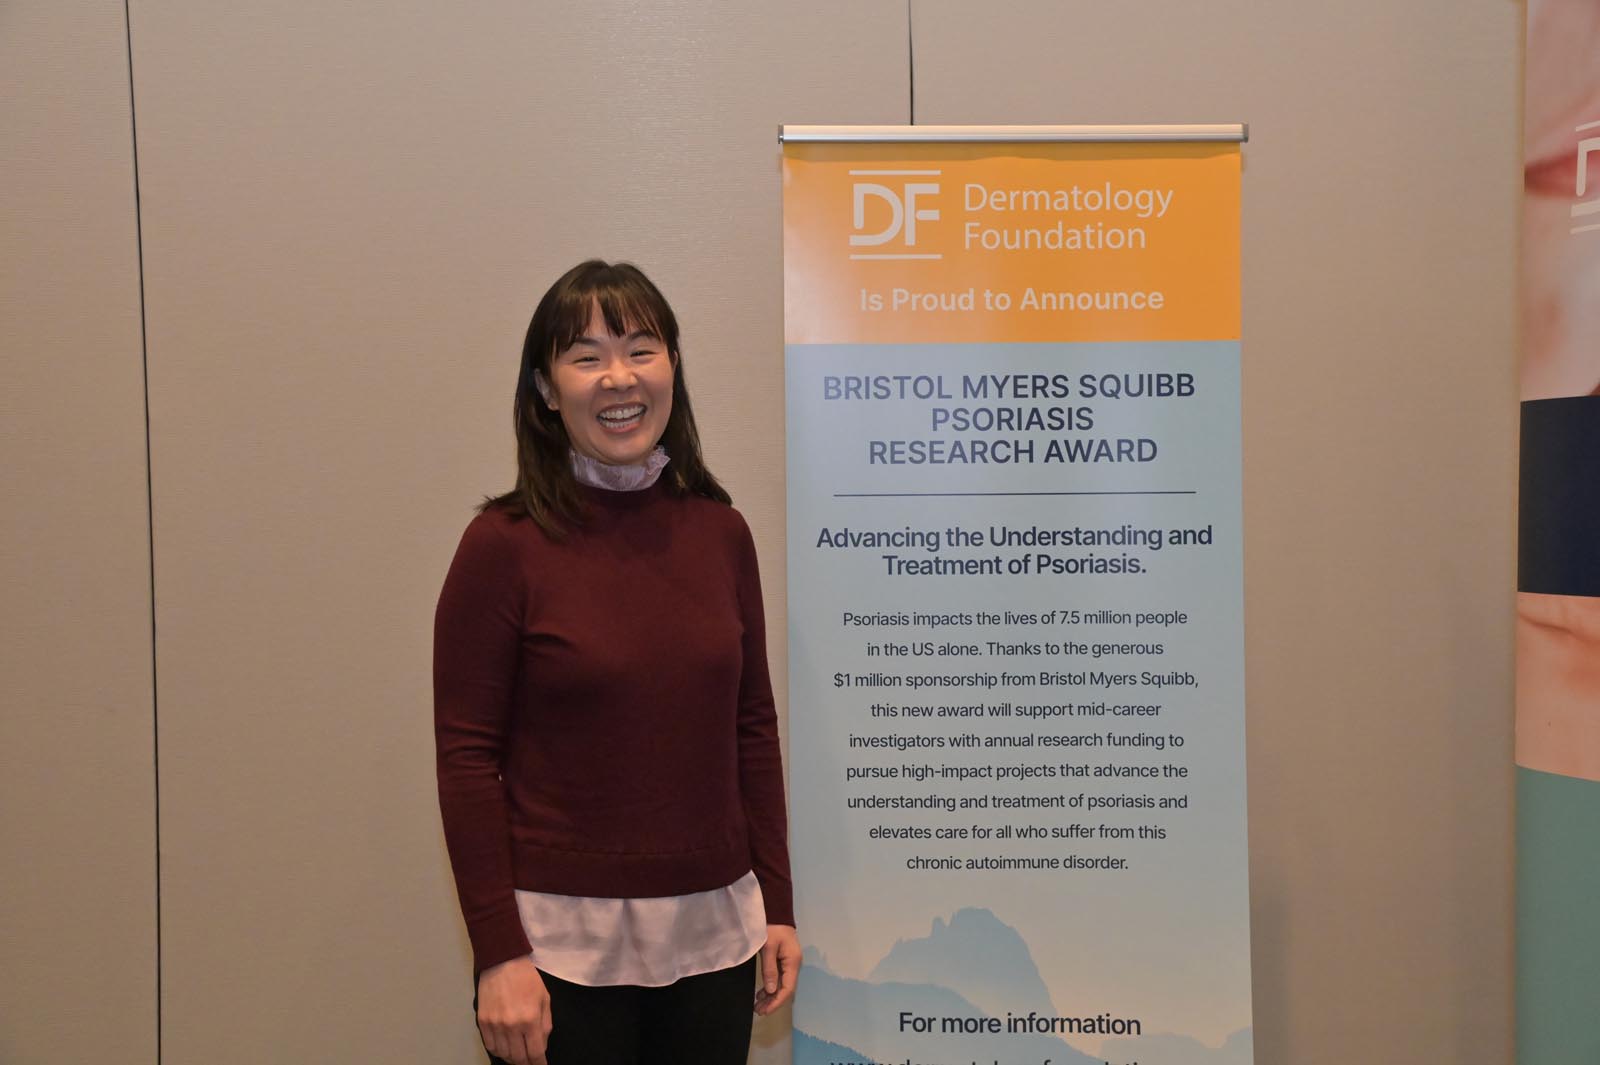 Congratulations to Dr. Junko Takeshita on her DF BMS Psoriasis Research Award. She will focus her research on participant diversity in clinical trials.